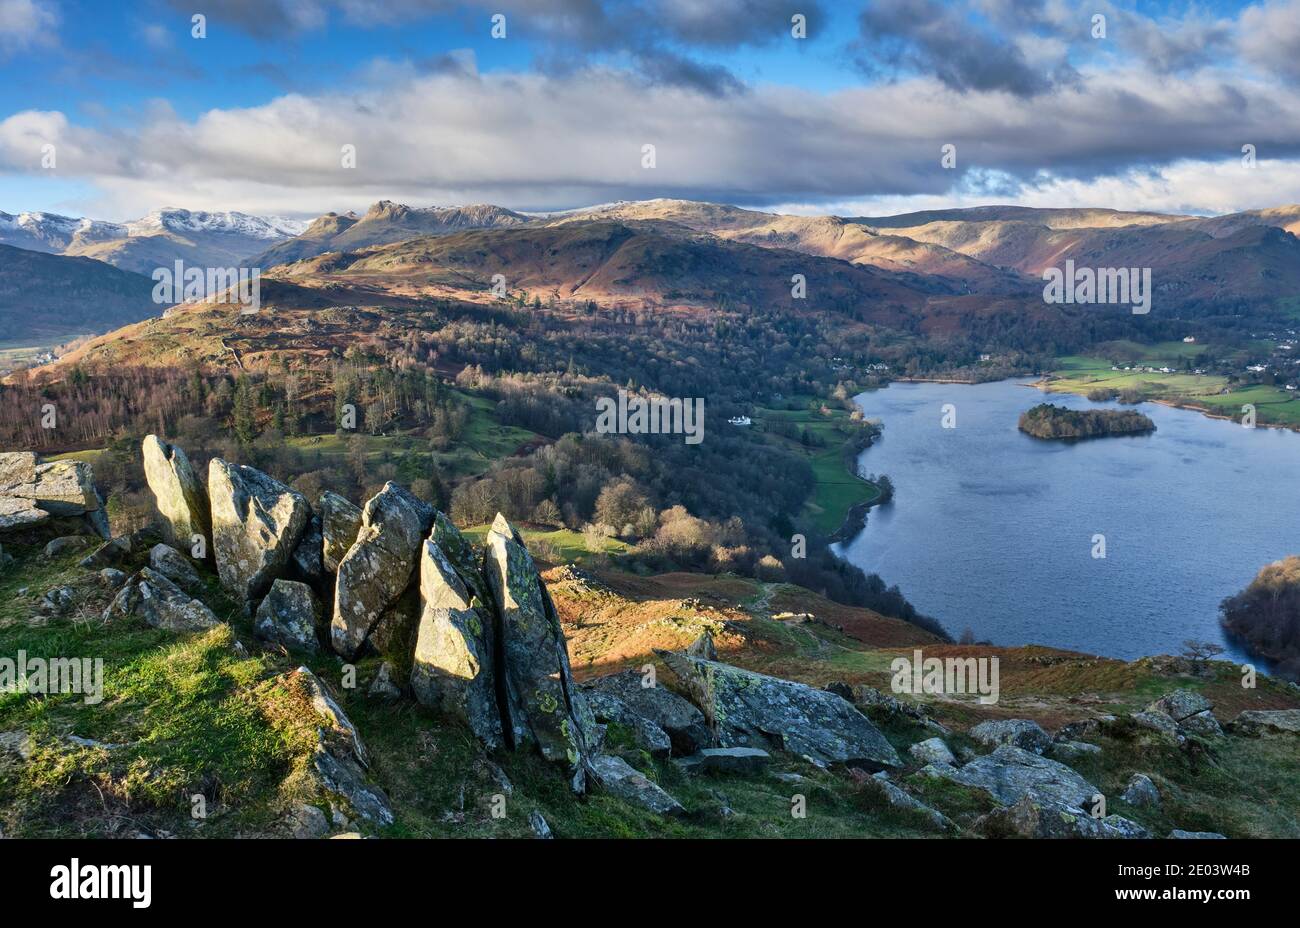 Crinkle Crags, Bowfell, The Langdale Pikes, Silver How e Grasmere visto da Loughrigg Fell, Grasmere, Lake District, Cumbria Foto Stock